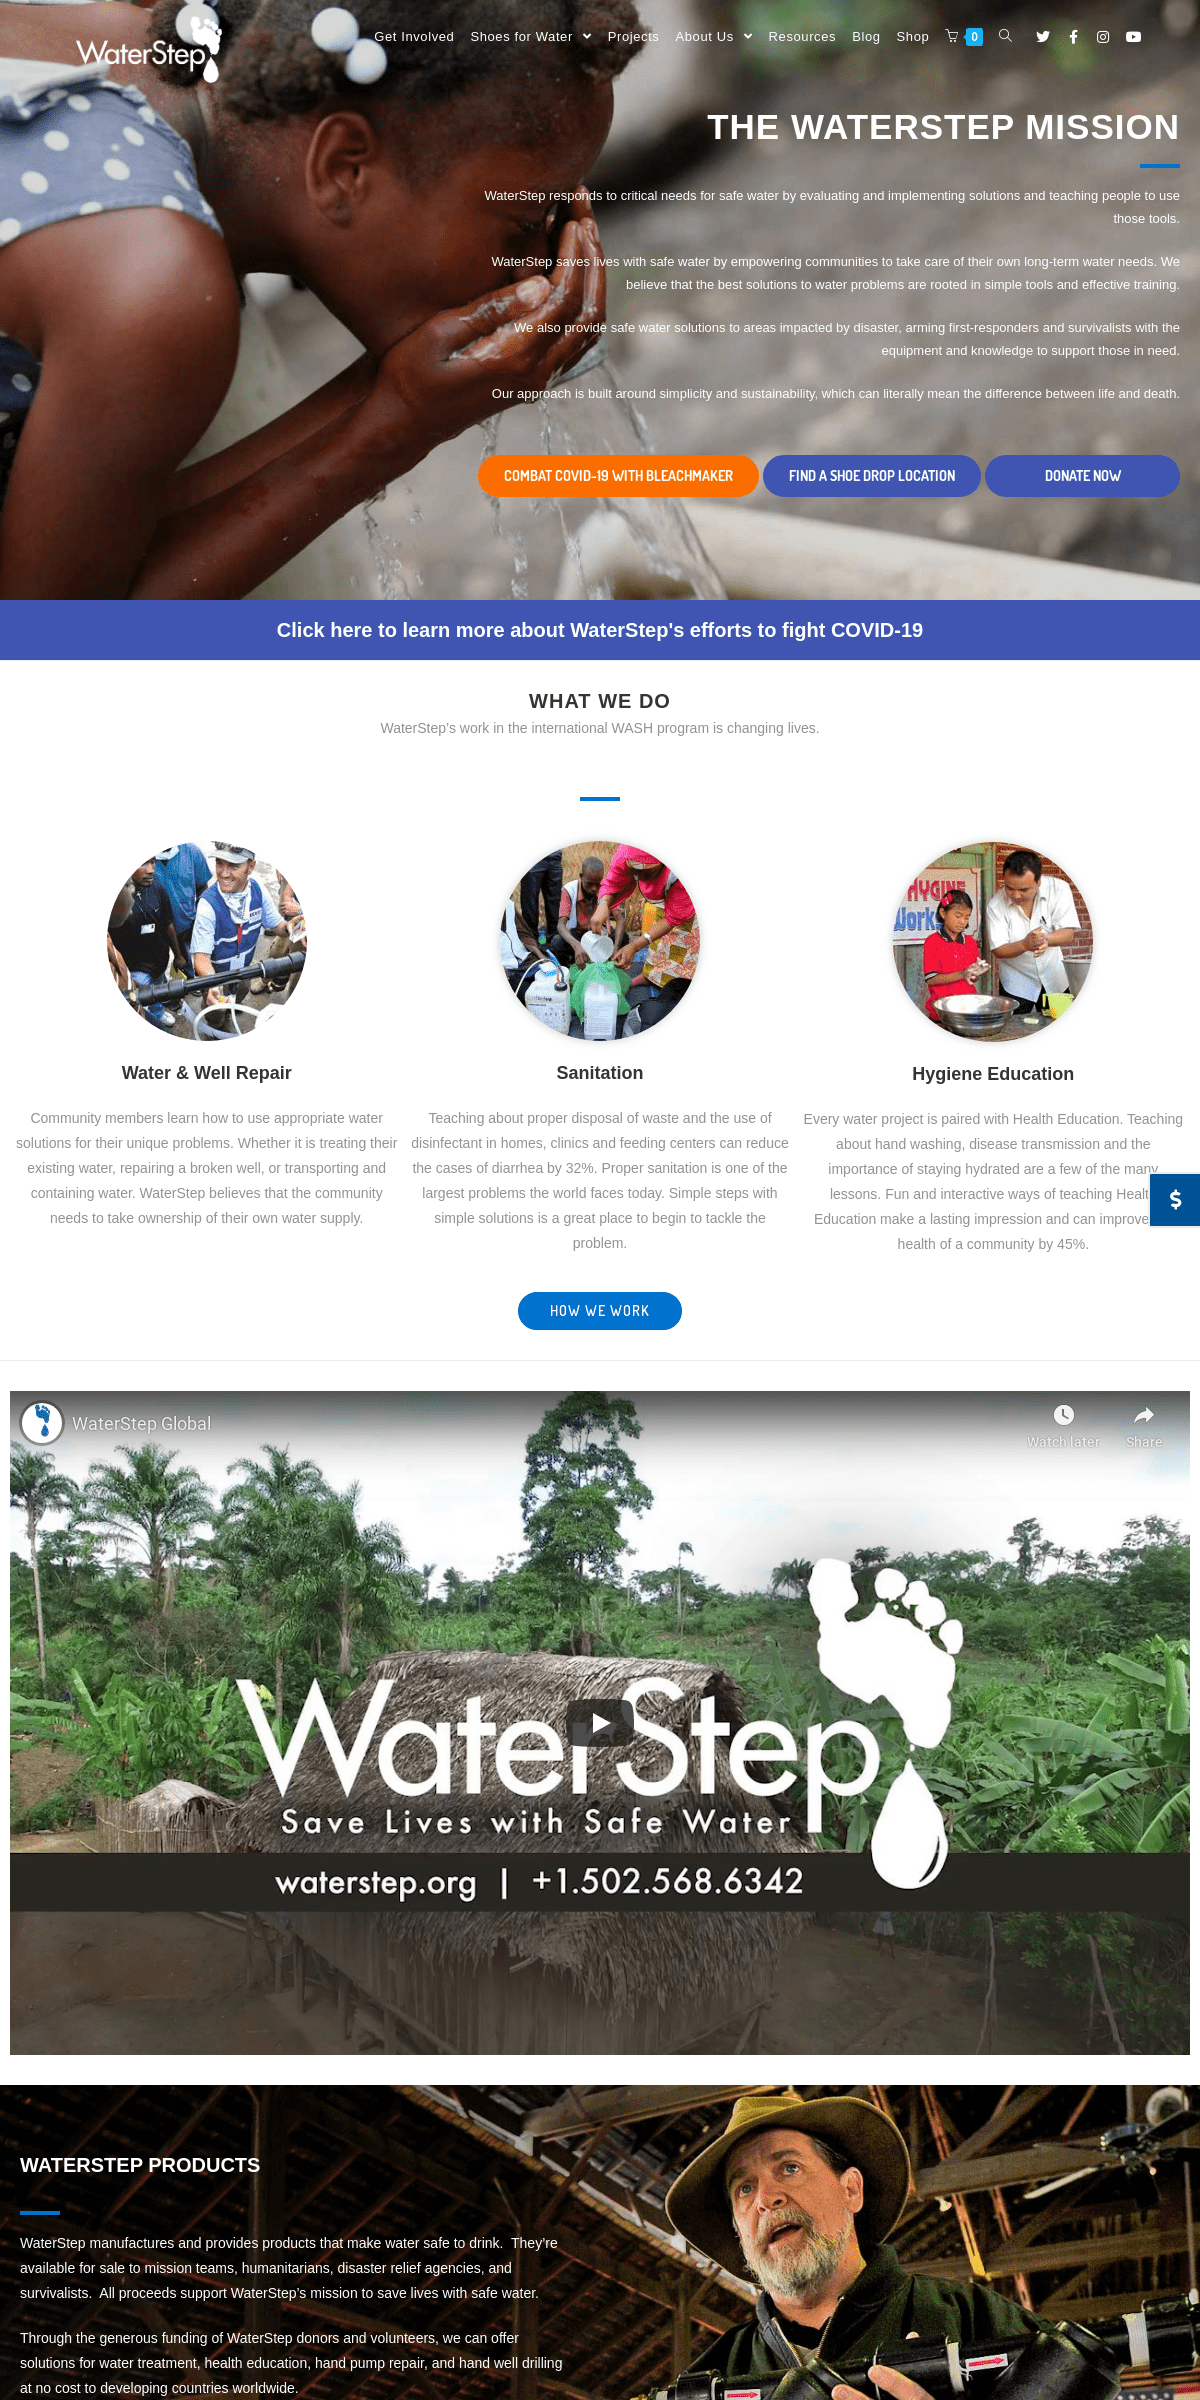 A complete backup of waterstep.org